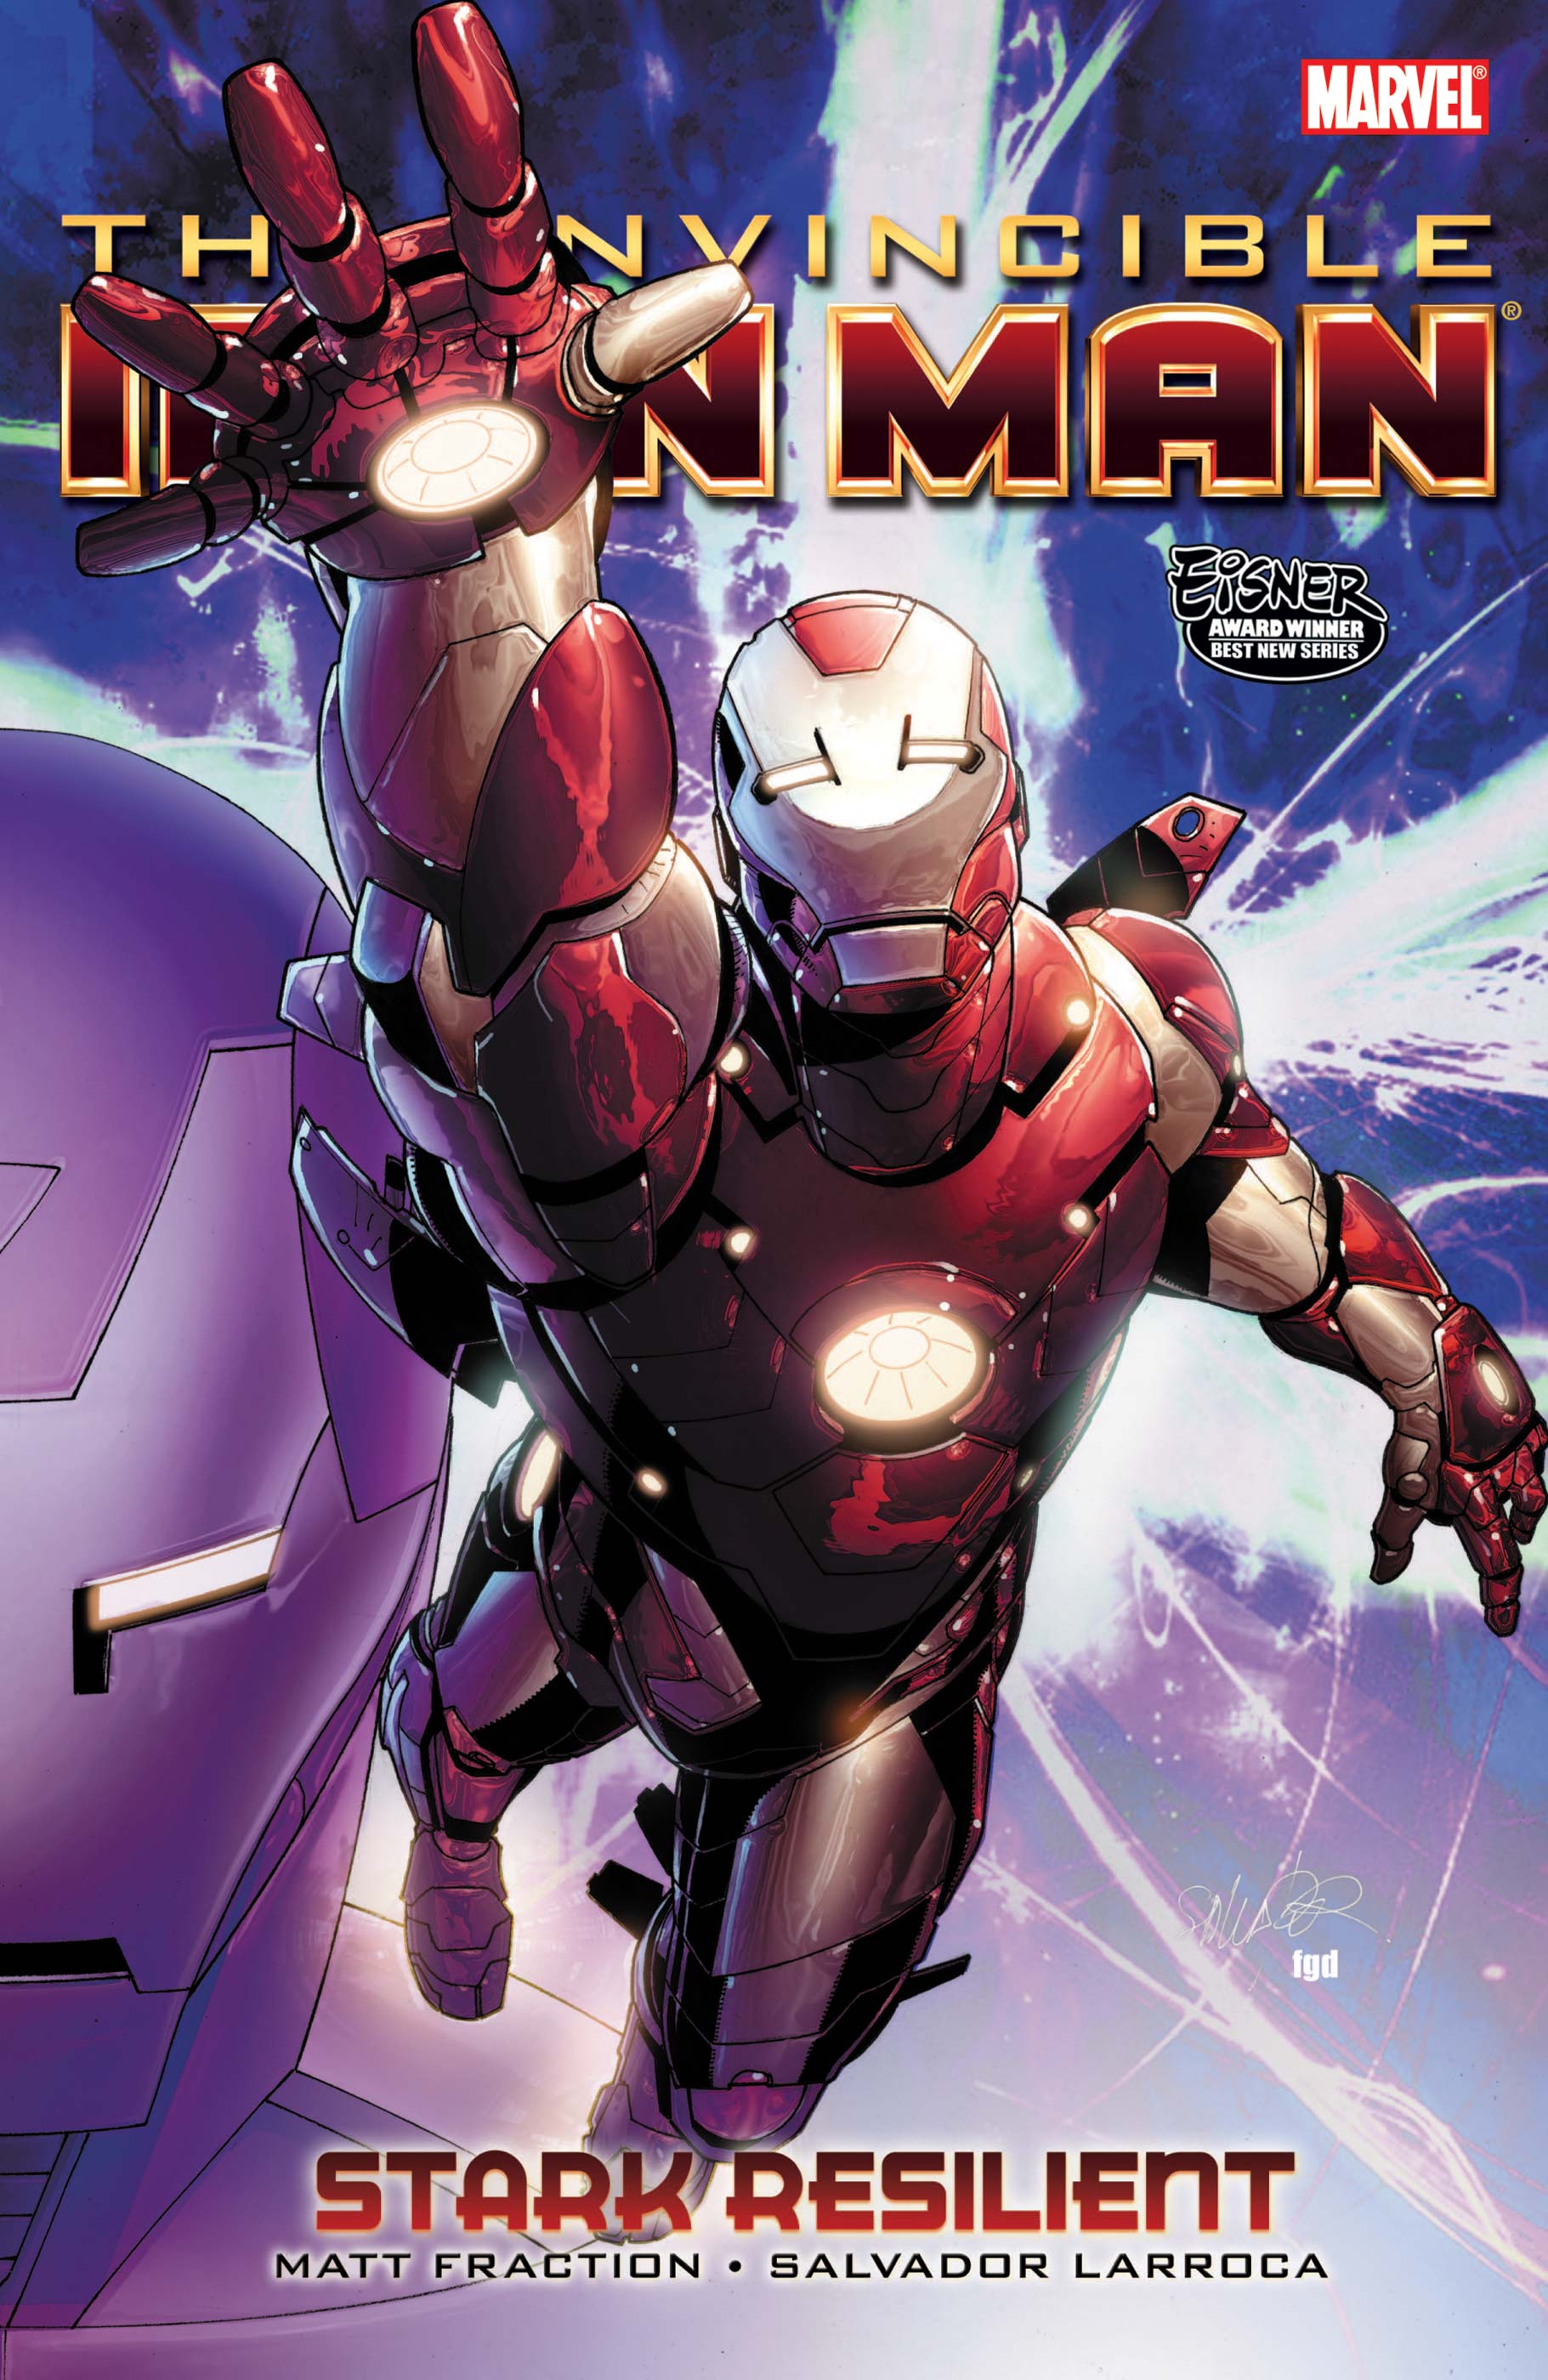 INVINCIBLE IRON MAN VOL. 5: STARK RESILIENT BOOK 1 TPB (Trade Paperback)